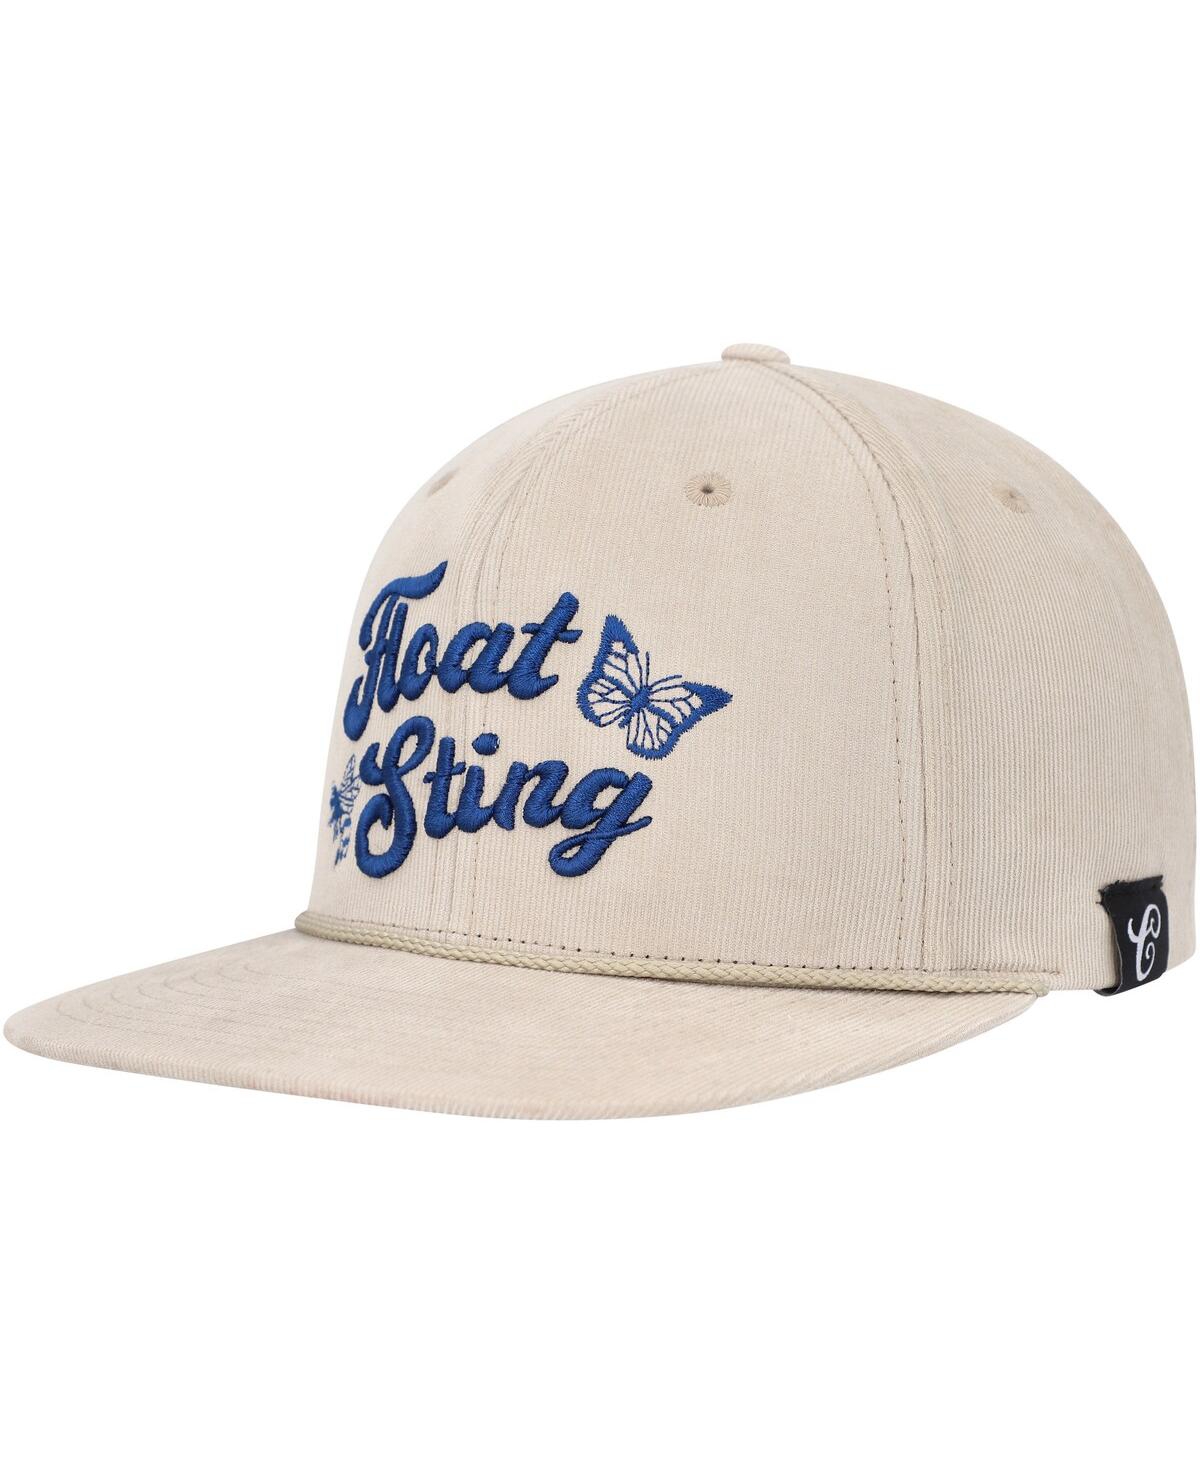 Shop Contenders Clothing Men's And Women's  Tan Muhammad Ali Float Sting Snapback Hat